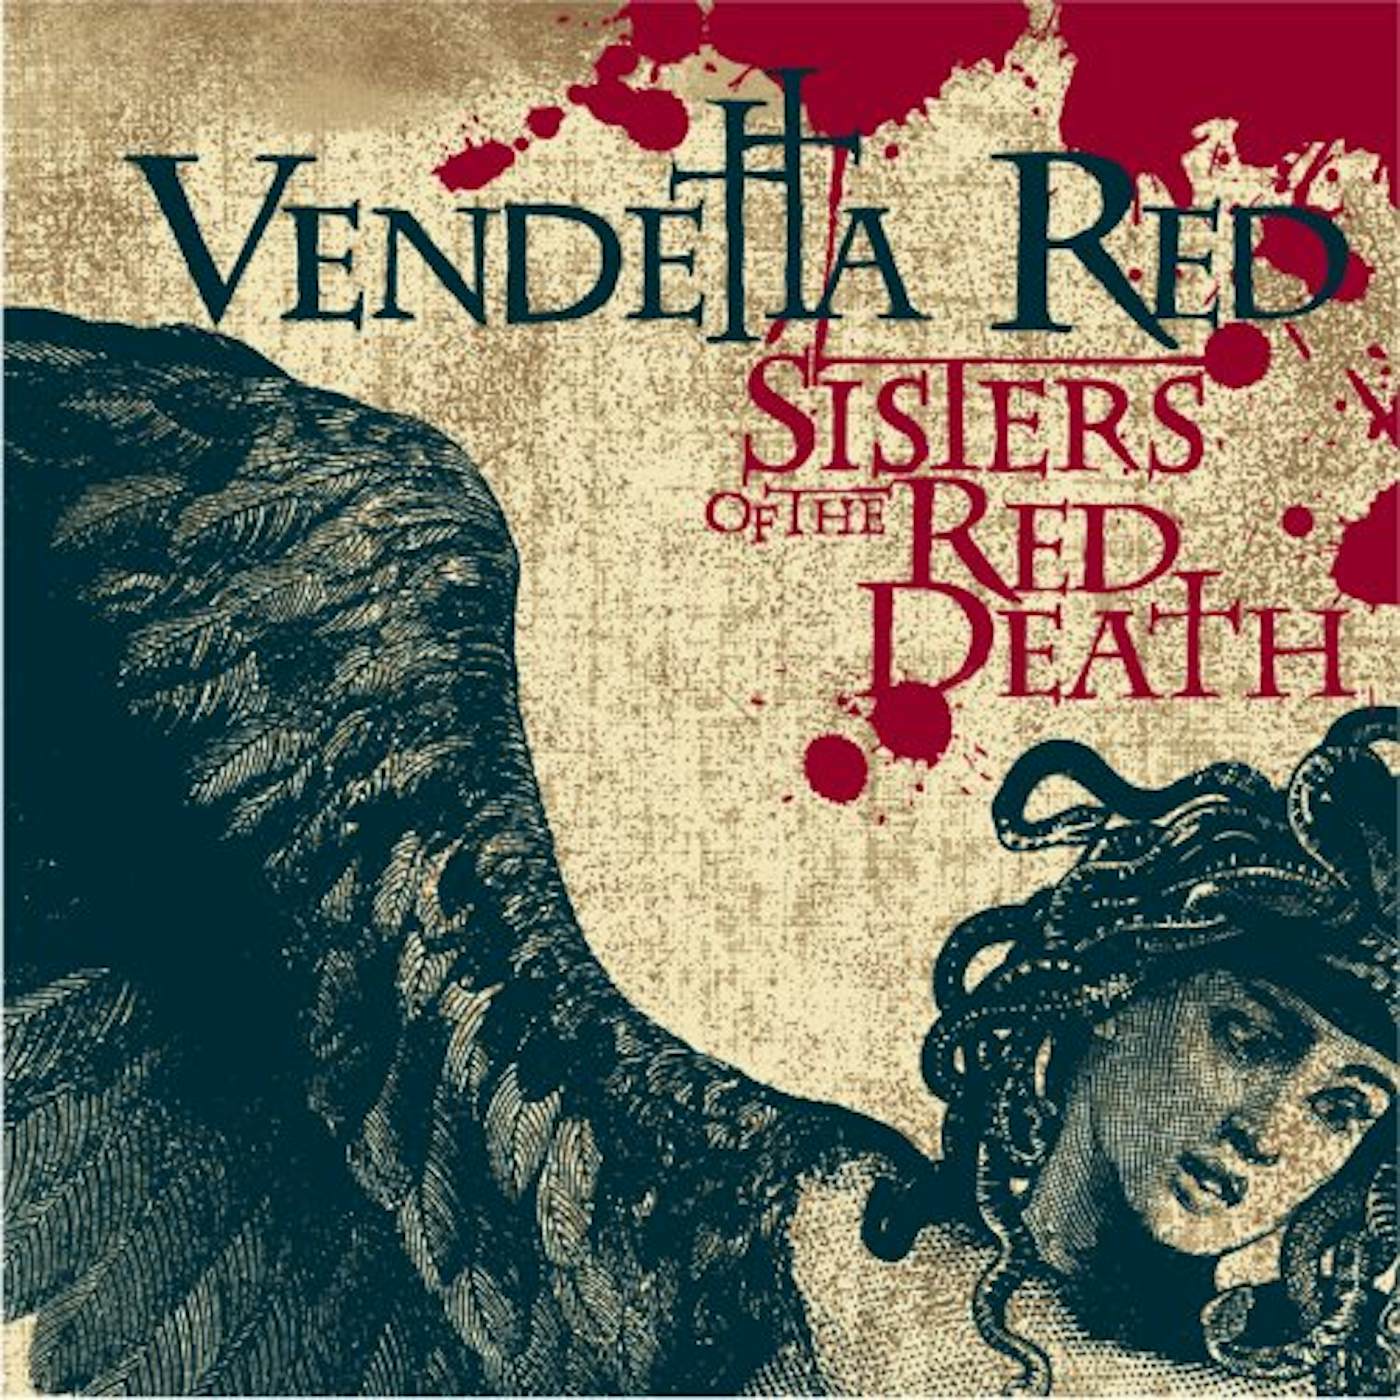 Vendetta Red Sisters of the Red Death Vinyl Record